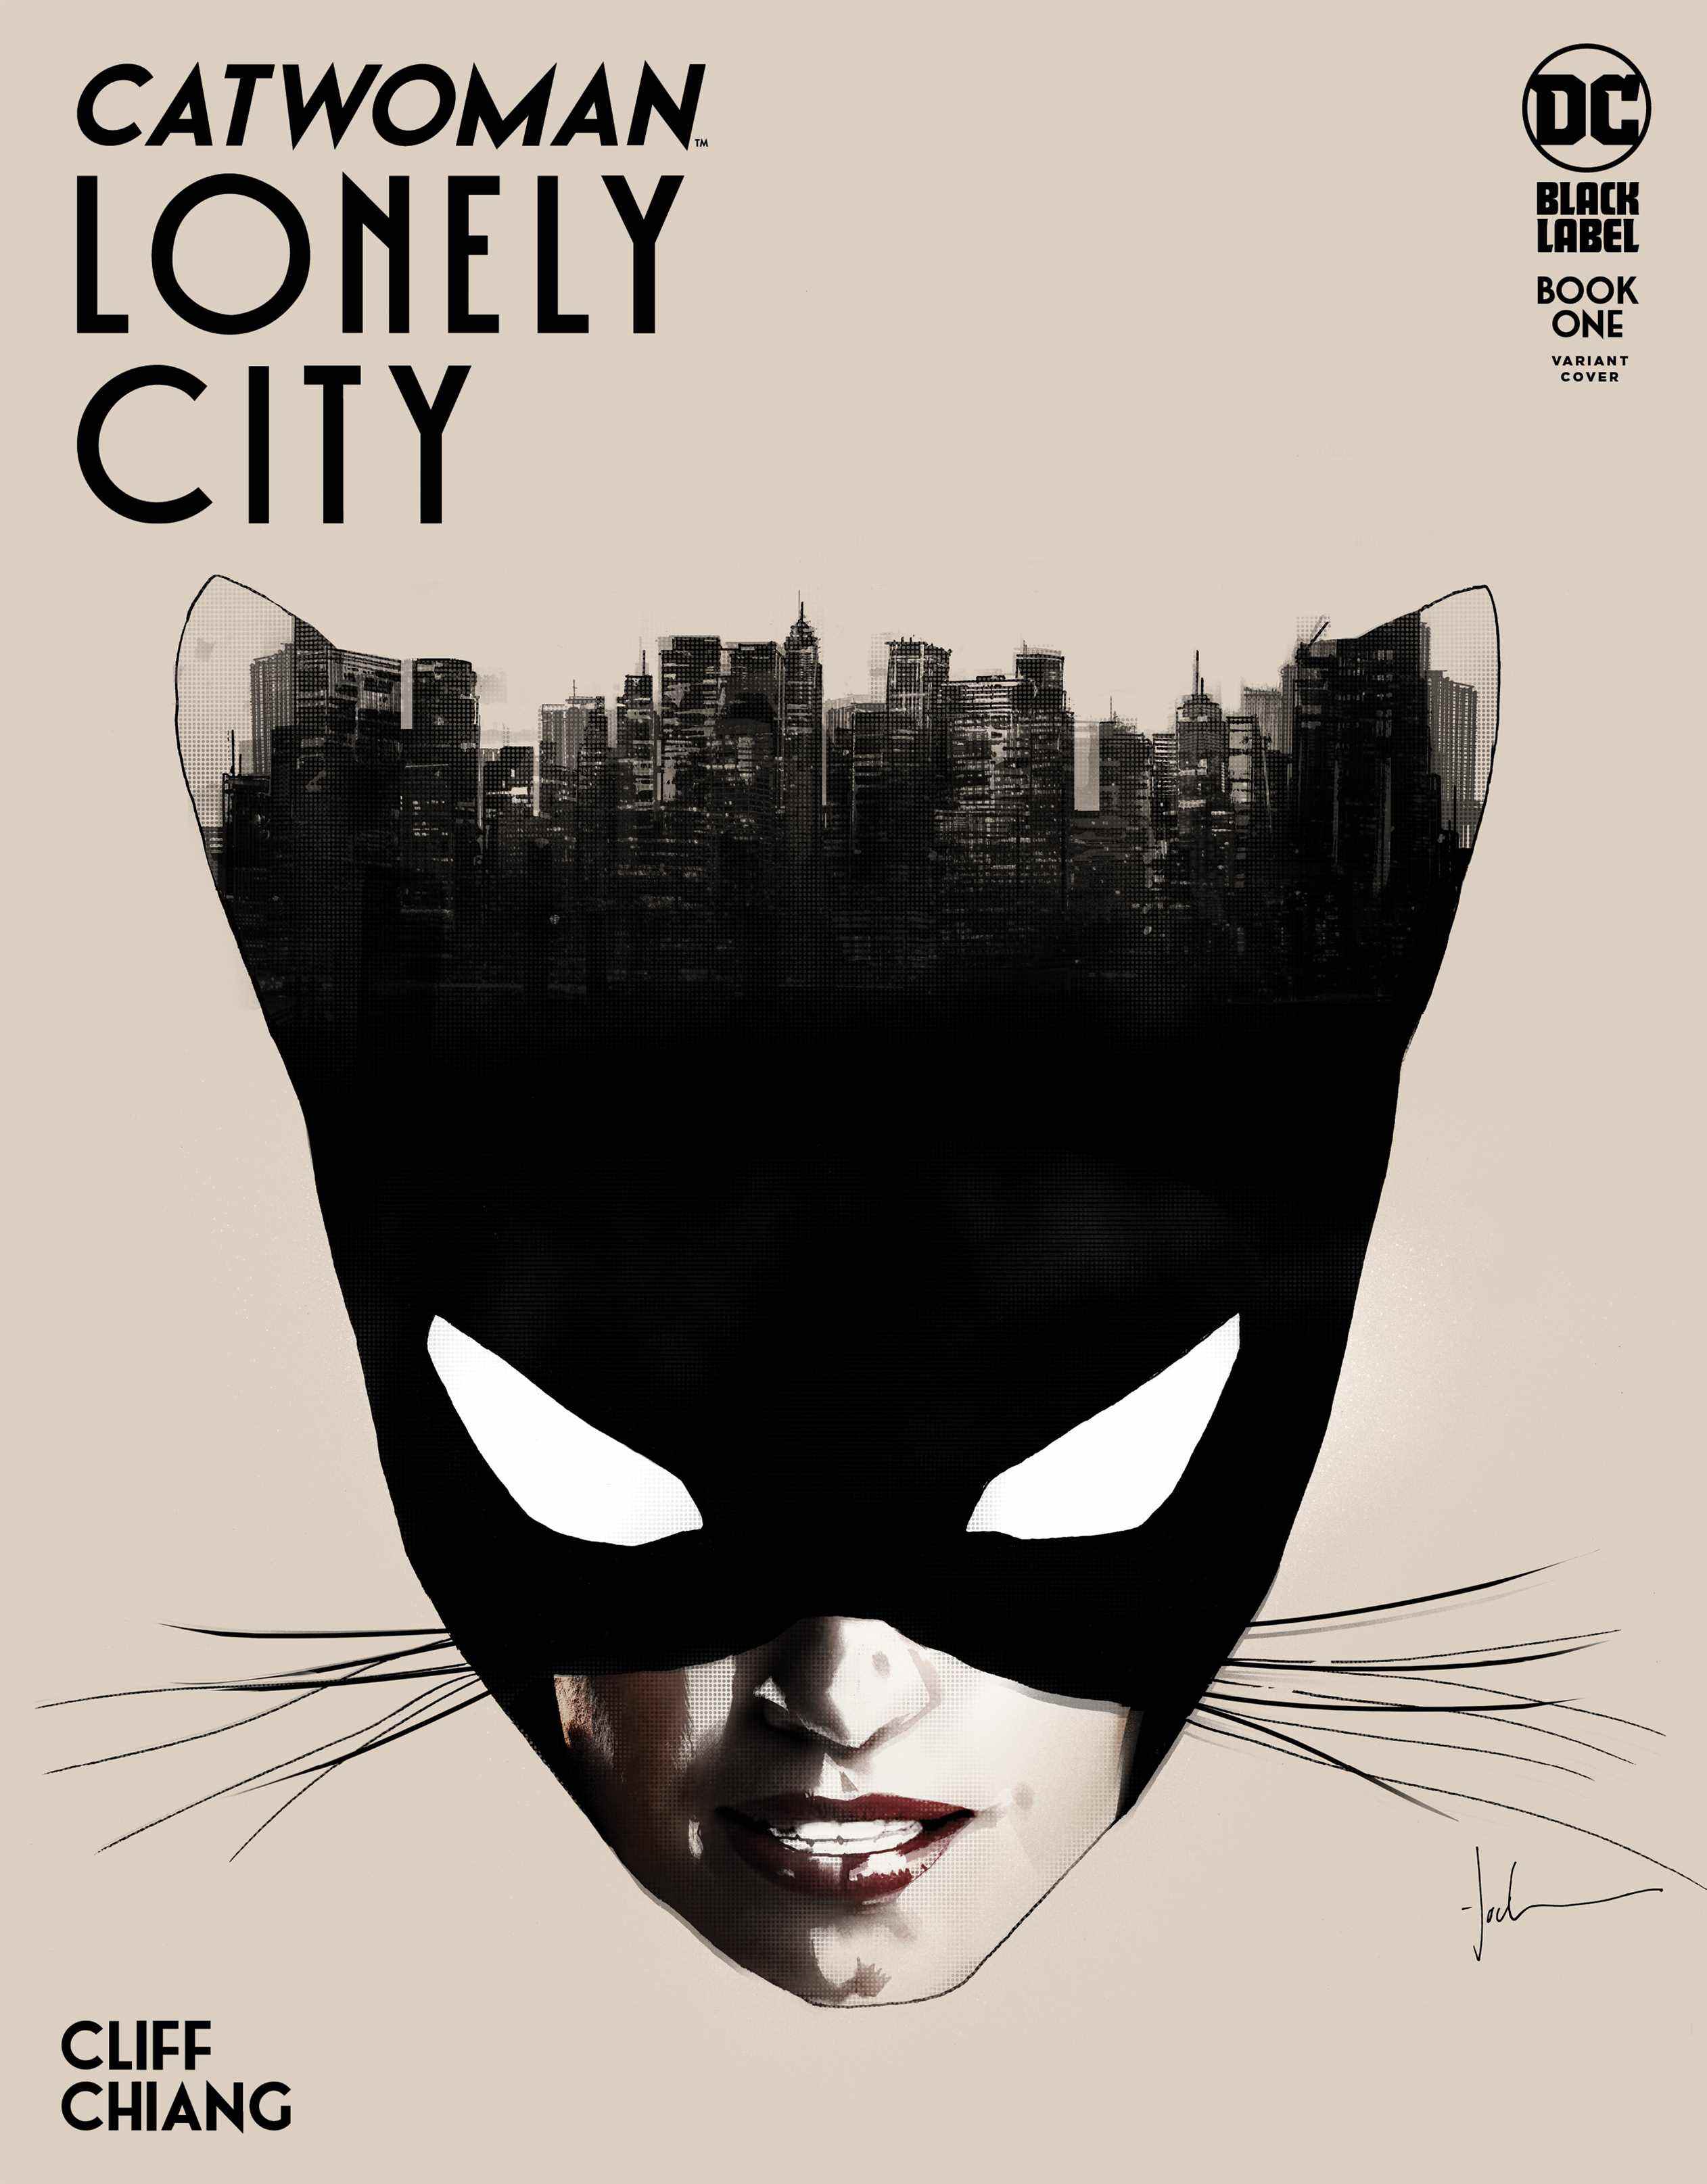 Catwoman: couverture variante Lonely City #1